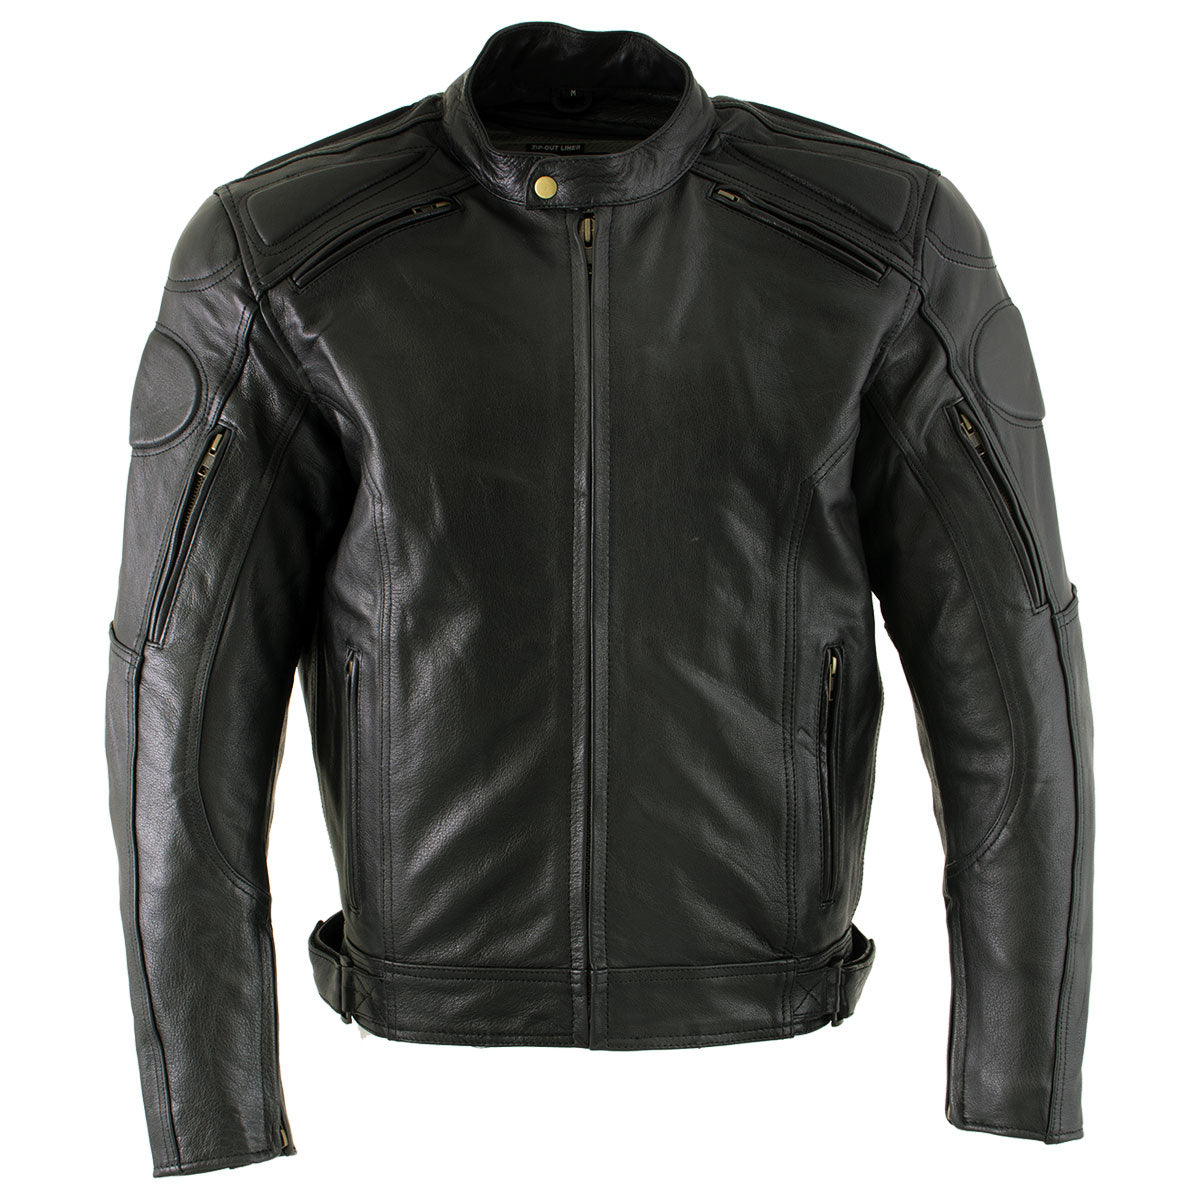 Xelement B7366 'Executioner' Men's Black Leather Racer Jacket with